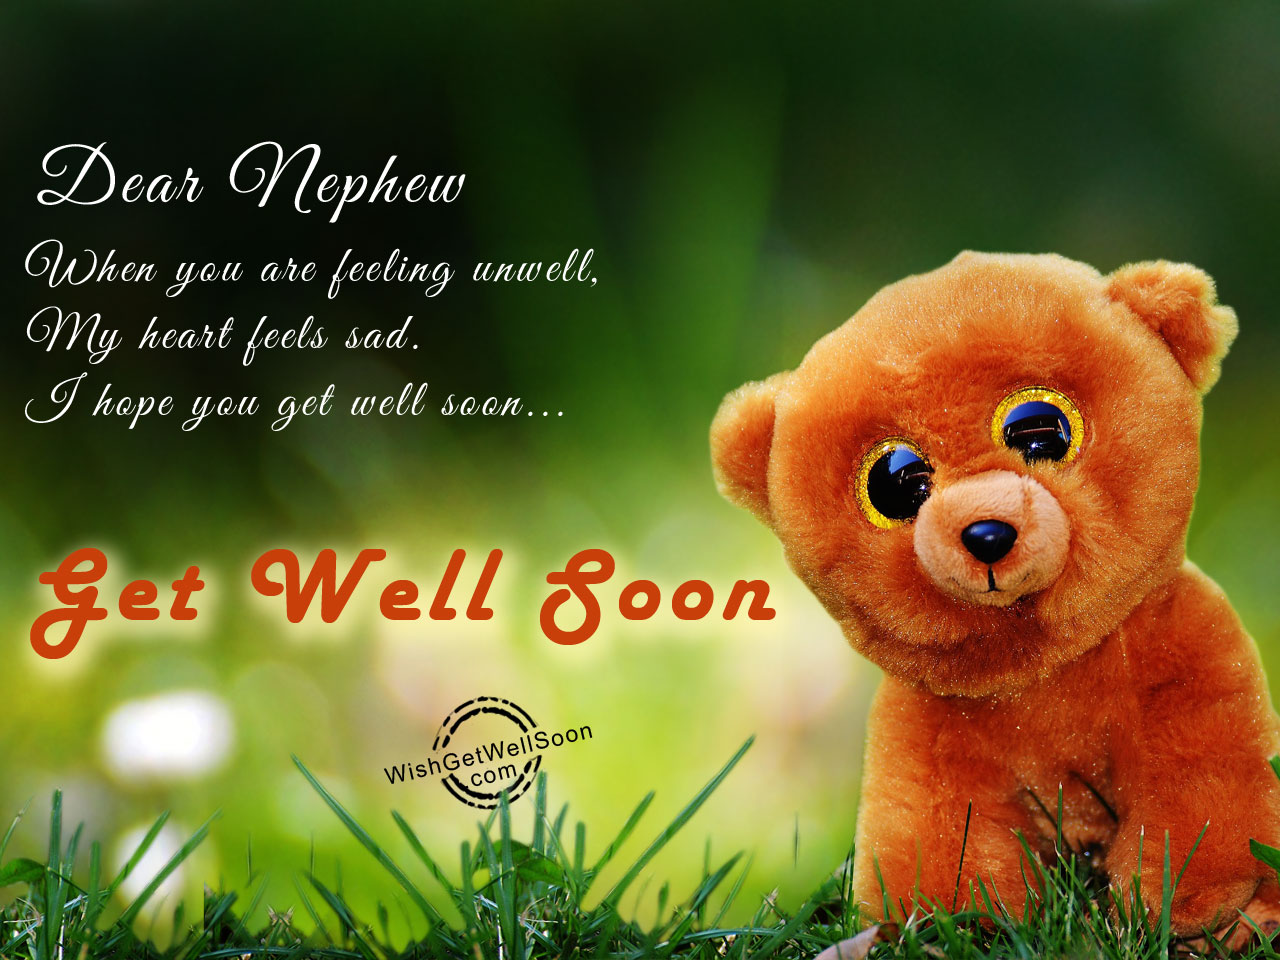 Get Well Soon Wishes For Nephew Pictures, Images - Page 3